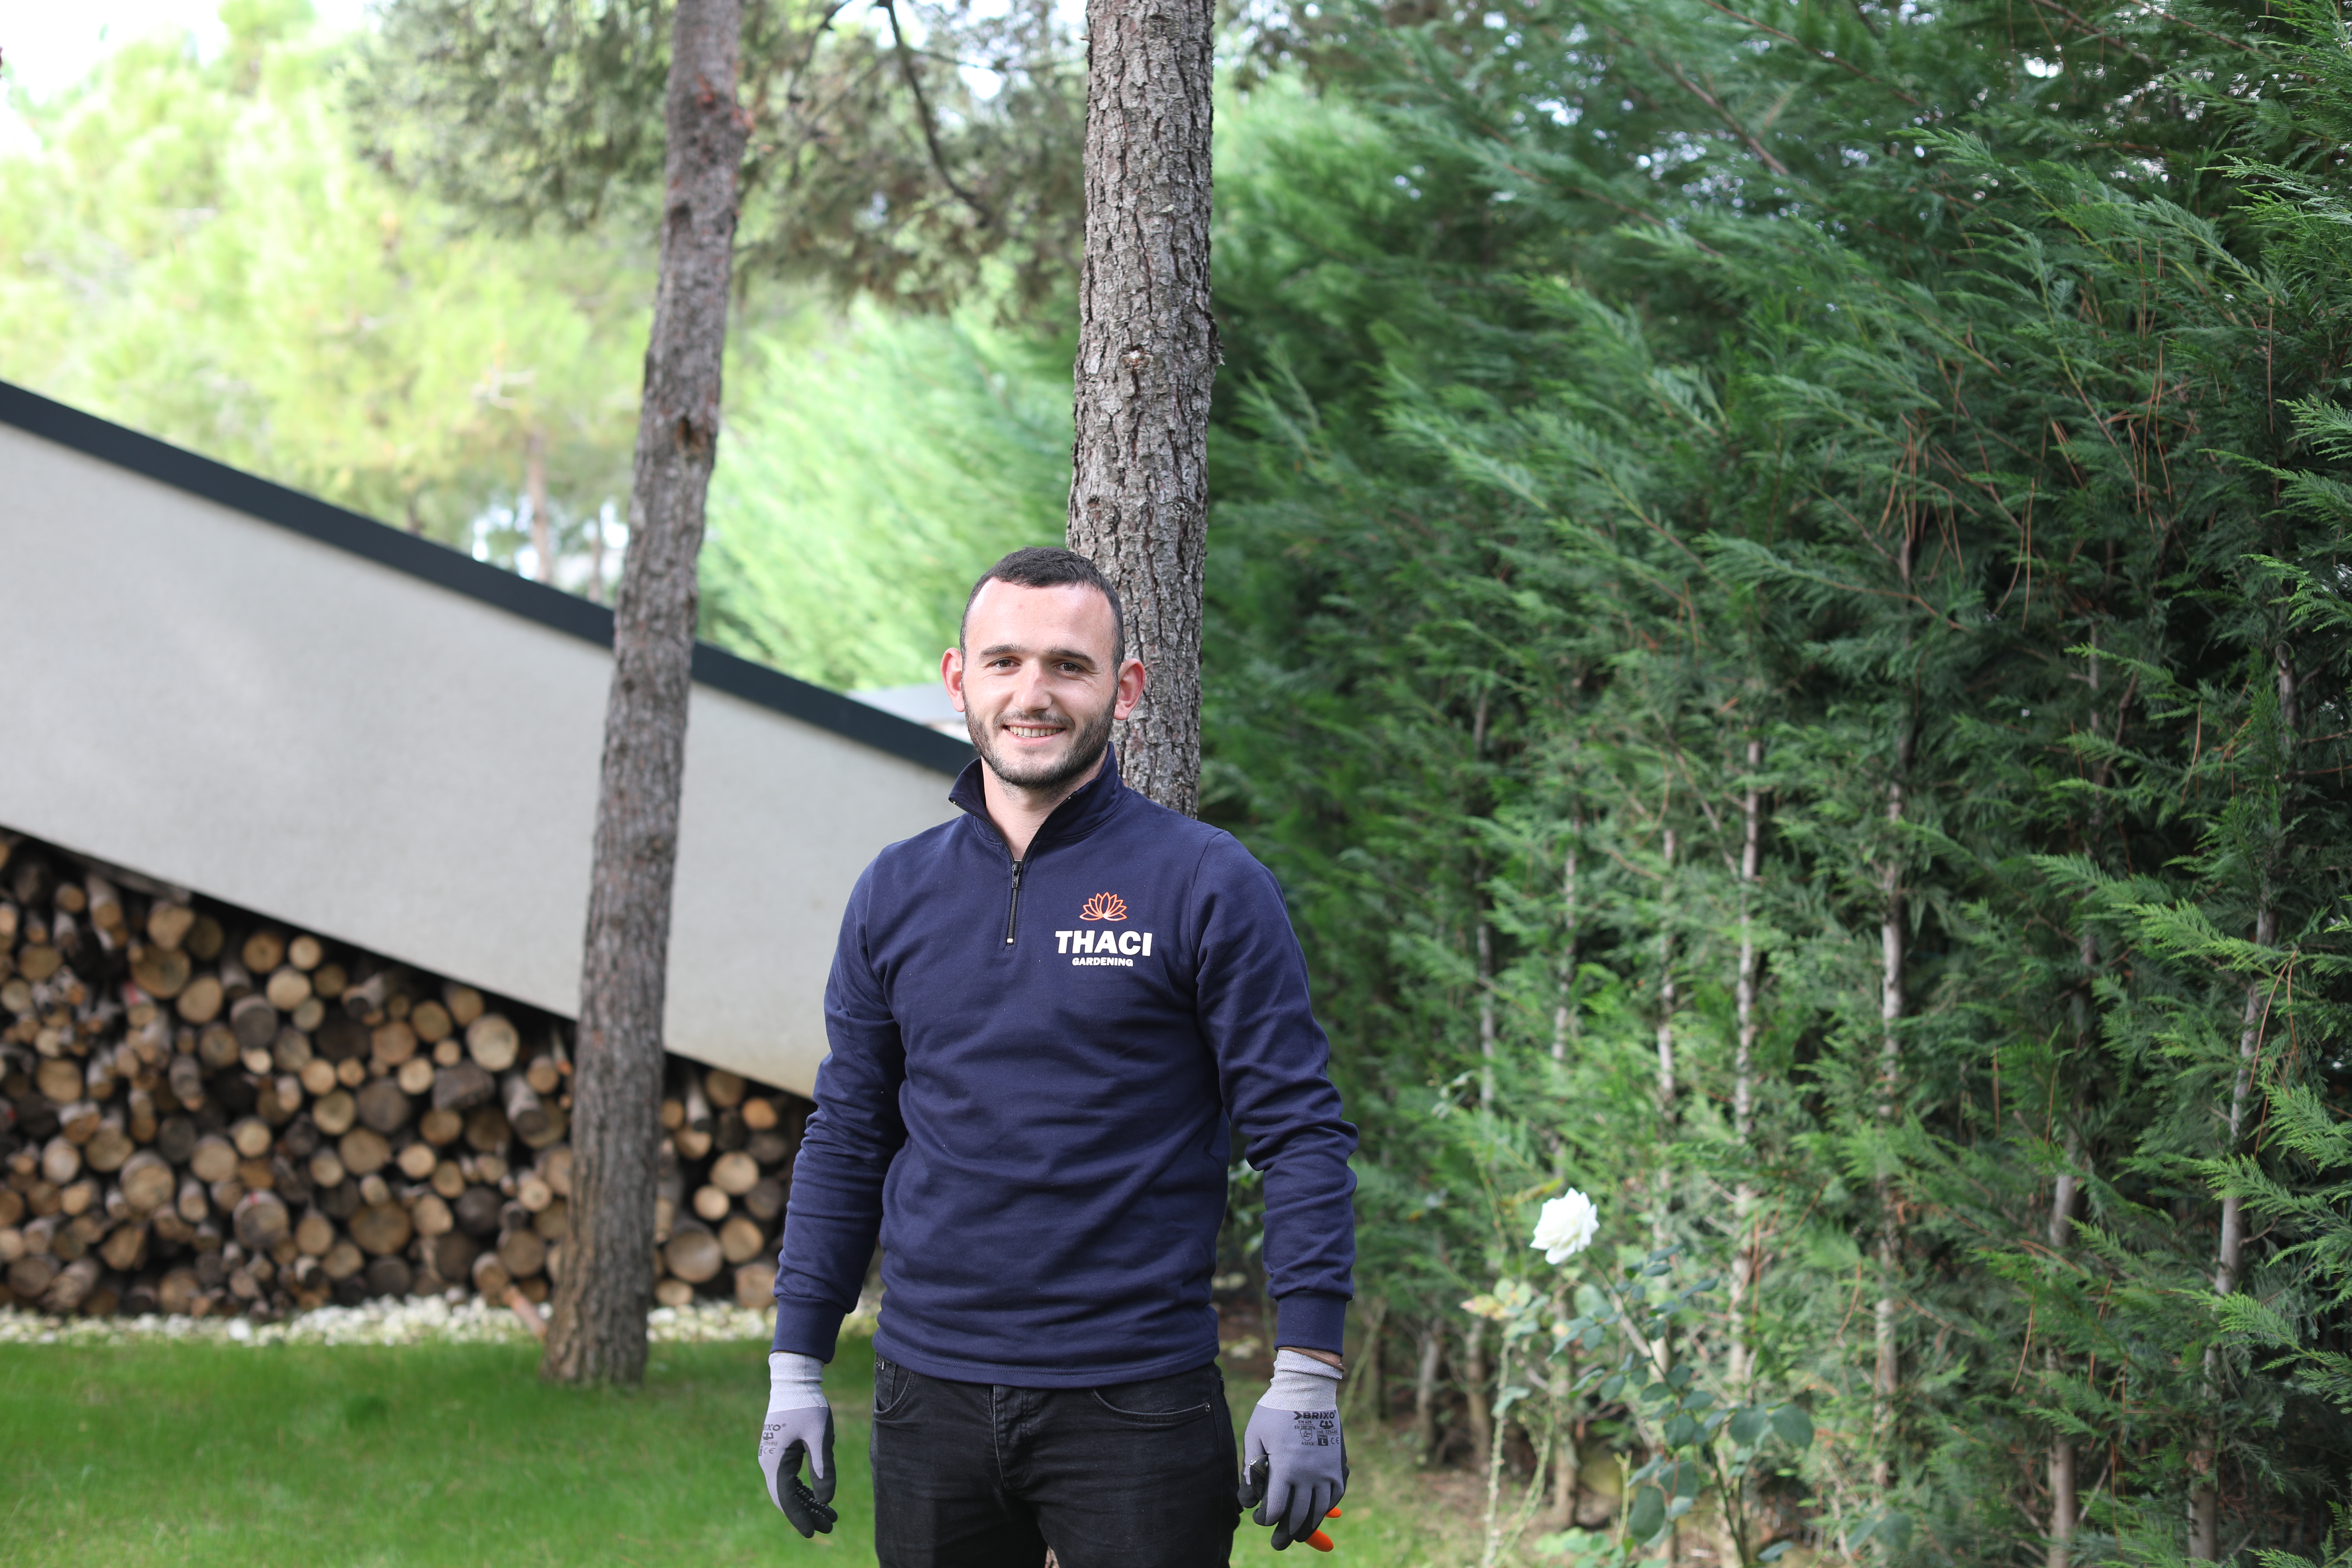 At only 24 years old, Shpresim is an ambitious entrepreneur who had long dreamt of taking his family's gardening business called “Thaci Gardening” to new heights.